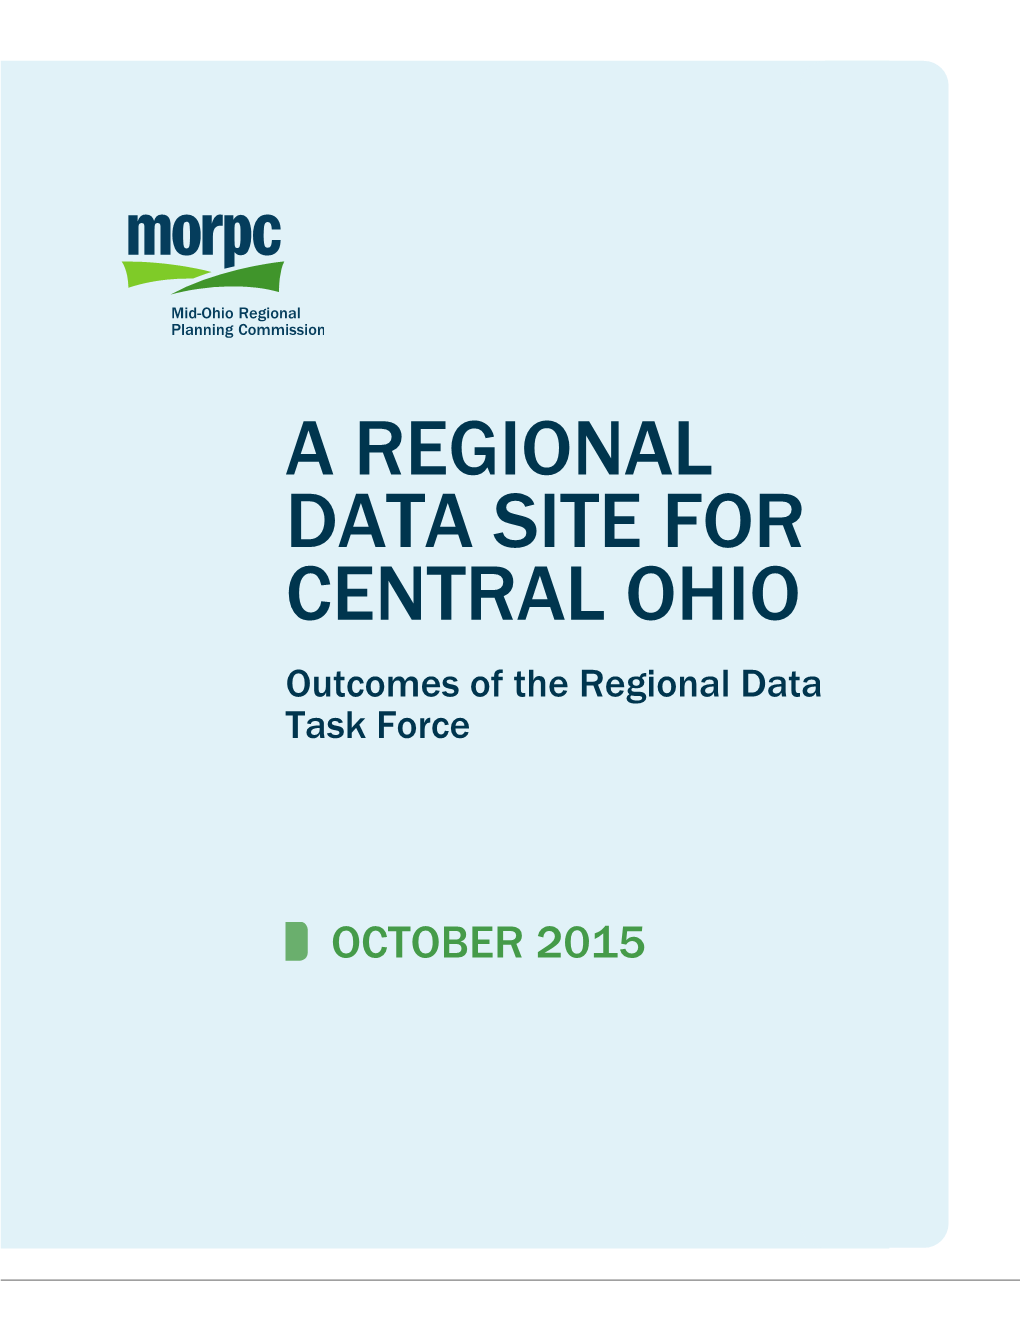 A Regional Data Site for Central Ohio